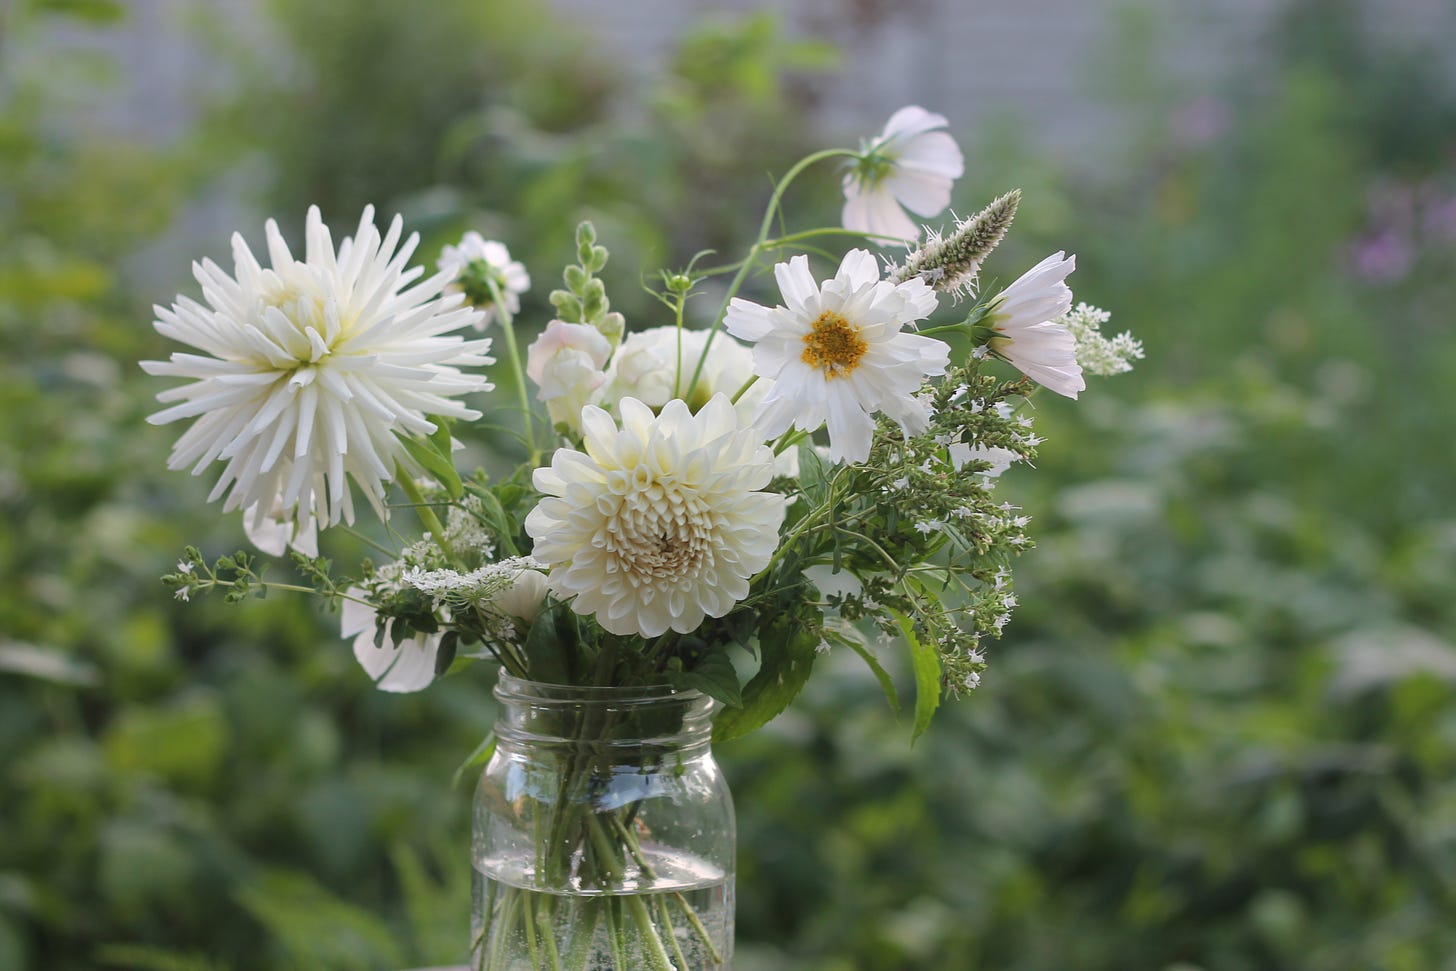 A mason jar holds a bouquet all in shades of white. It is sitting outside, greenery blurred behind it.